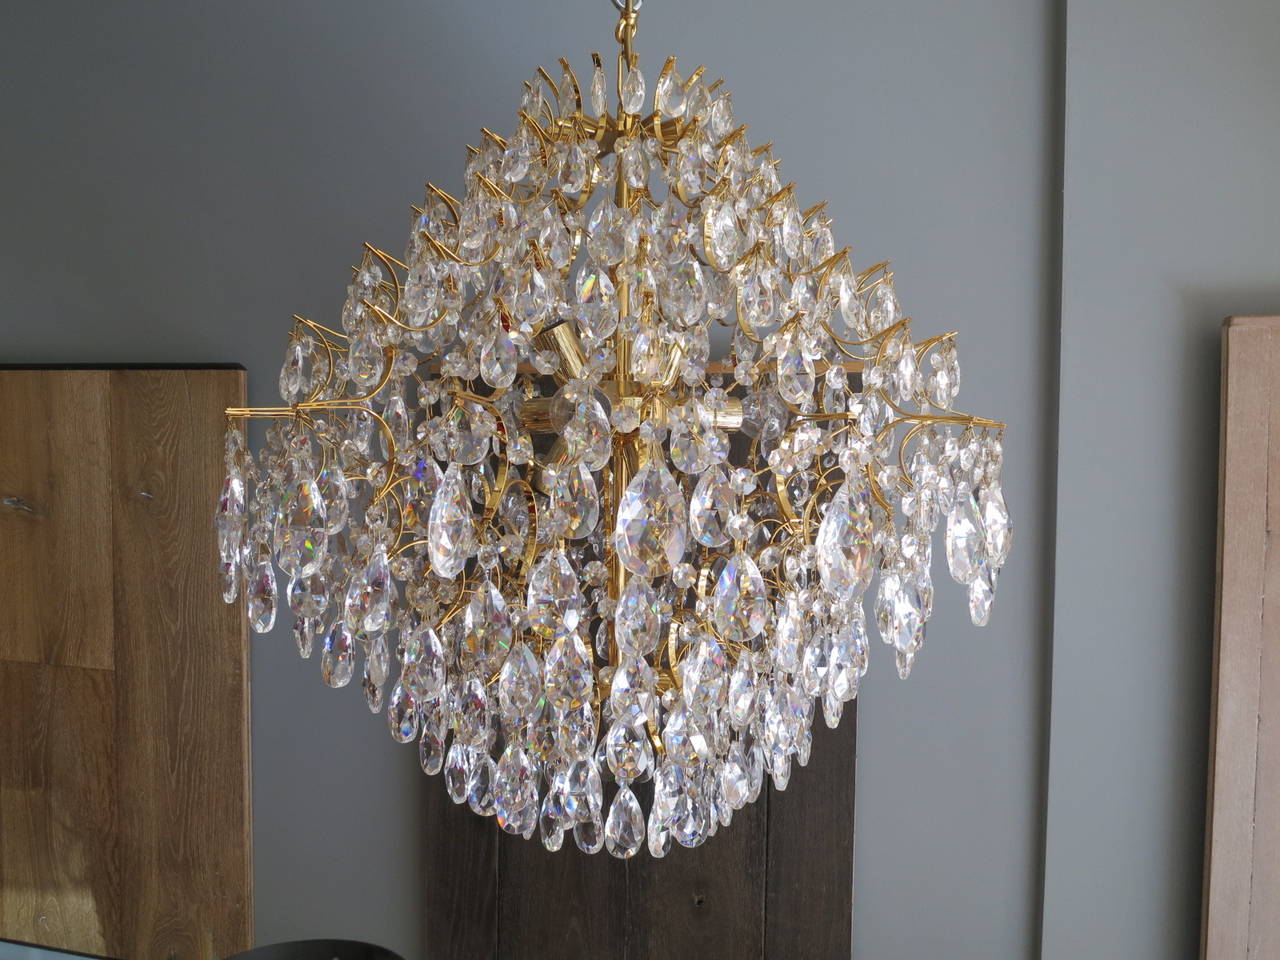 An unusual Italian crystal chandelier, with a contemporary designed gold lacquered frame, with traditional cut crystal drops. The light has nine-light fittings and dated from the 1970s.